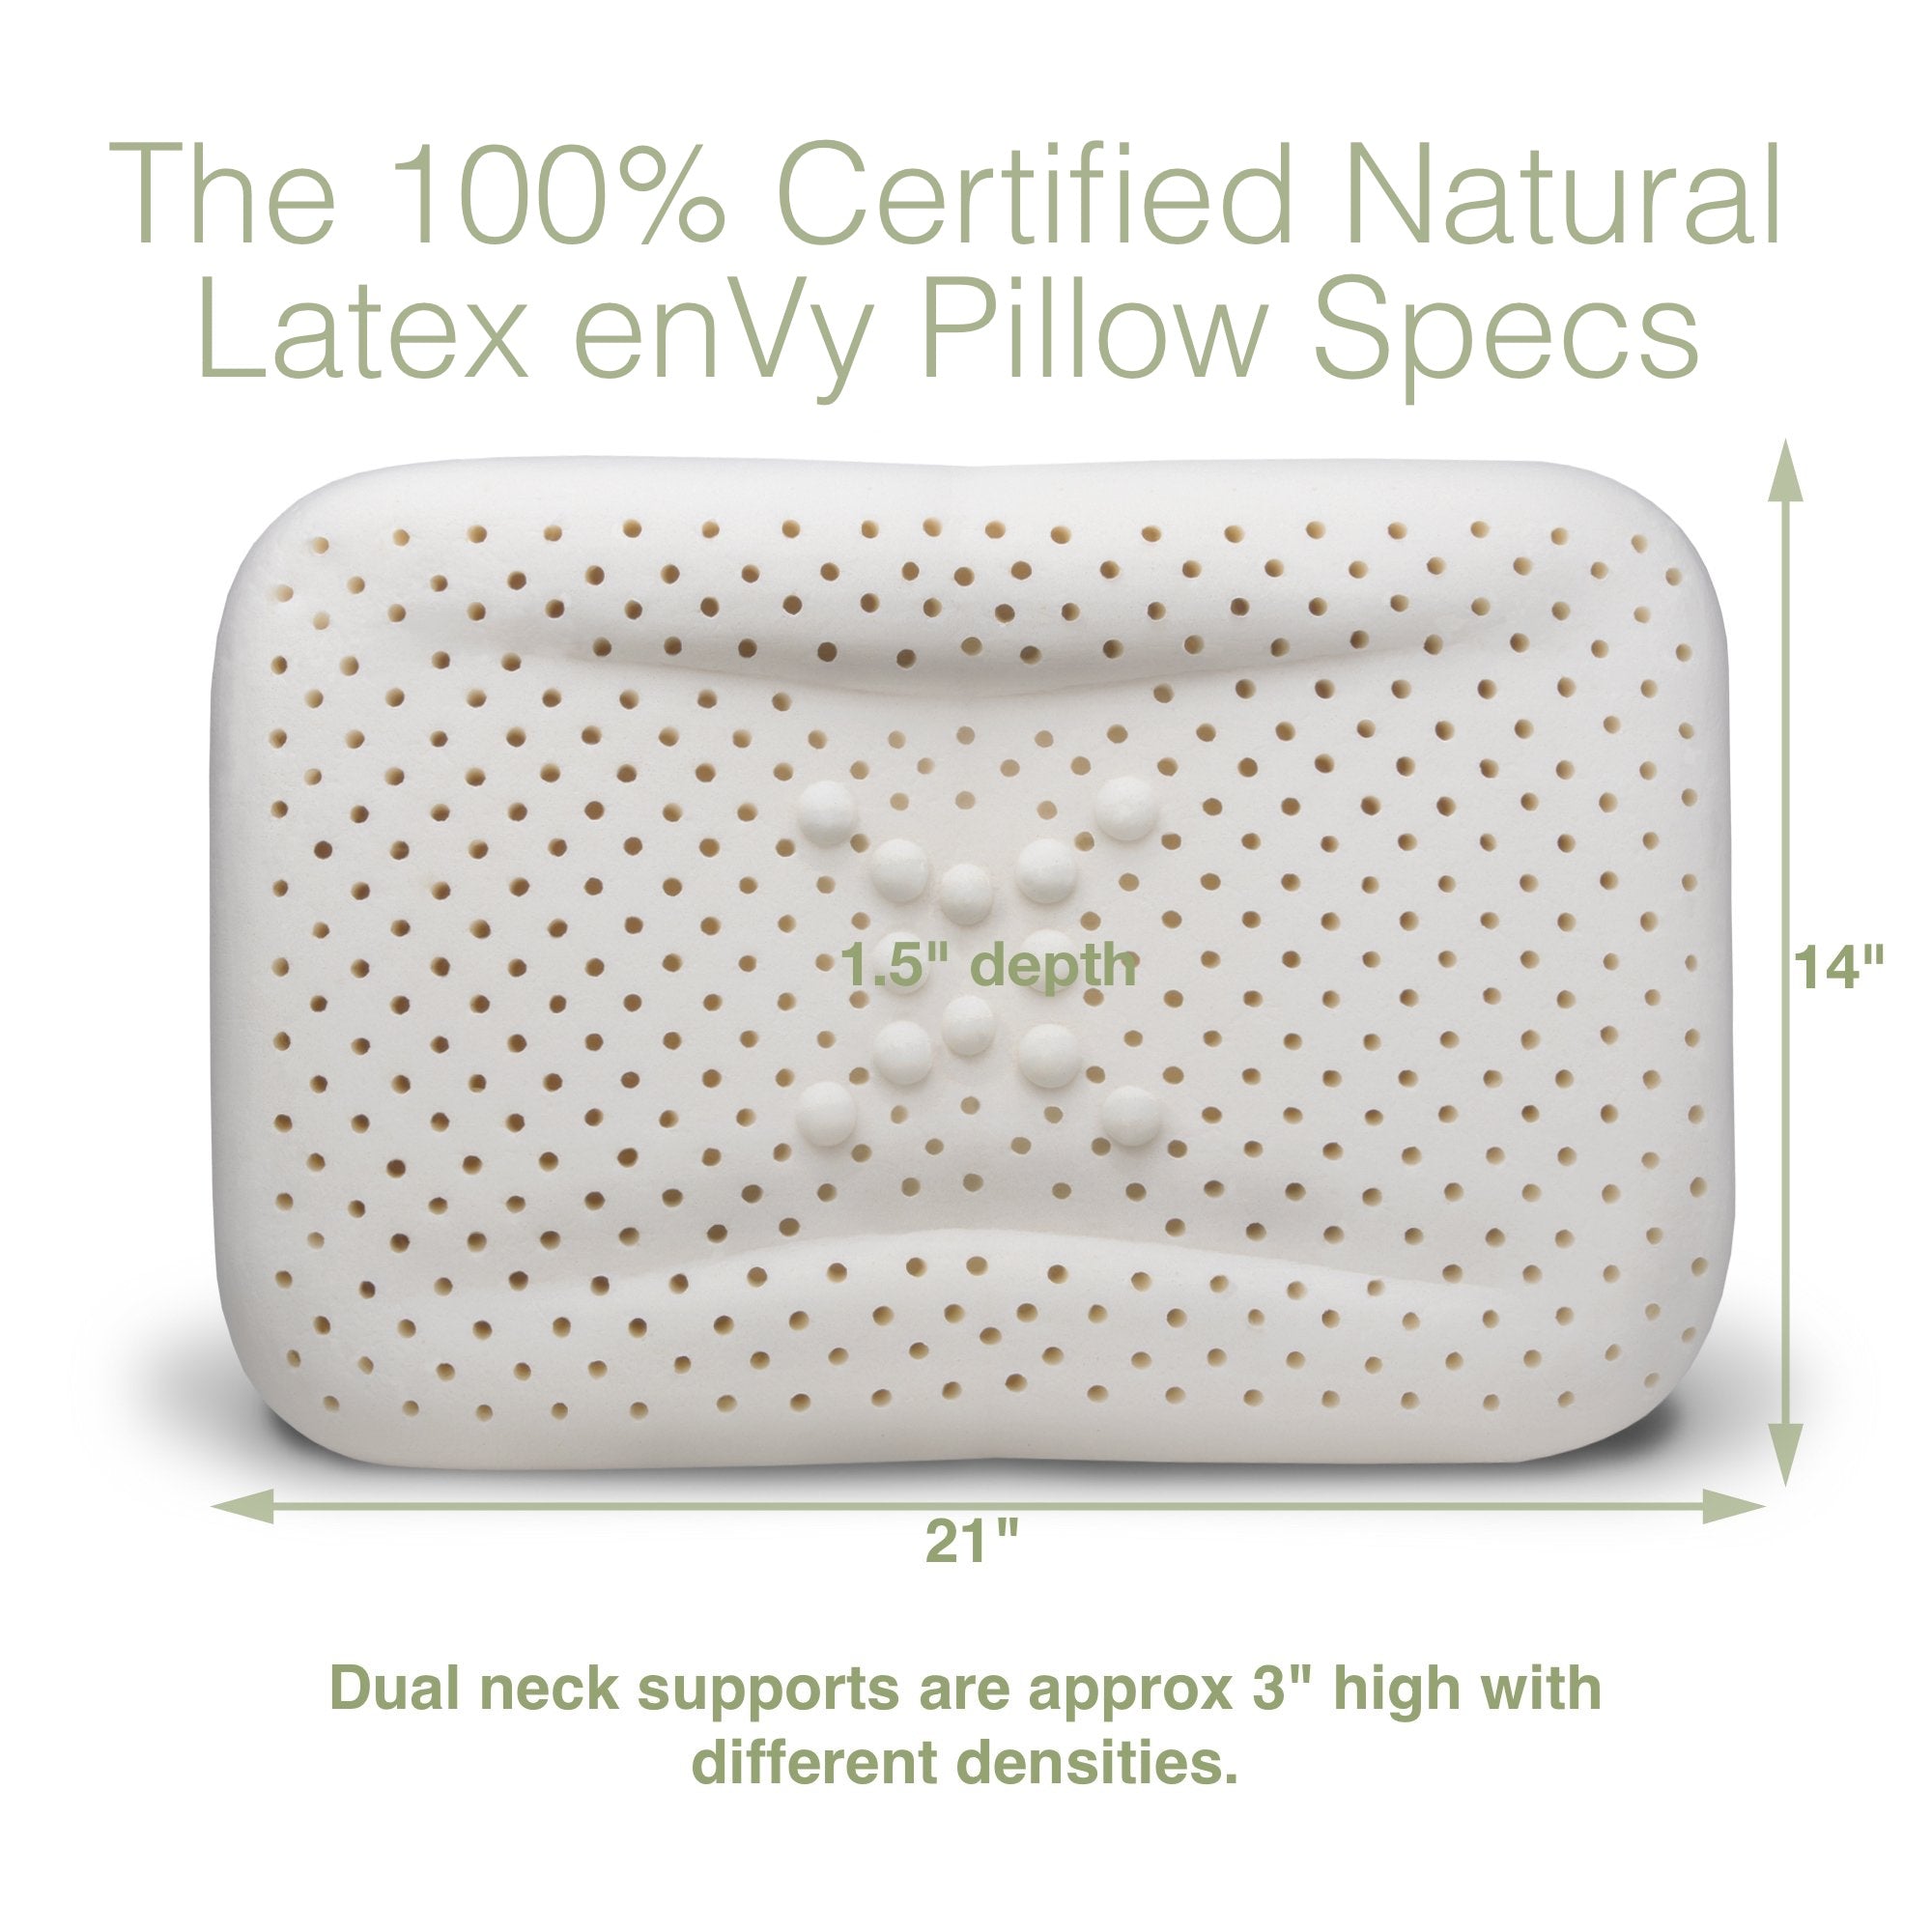 The enVy® COPPER + TENCEL™ Anti-Aging Pillow - 100% Natural Latex Pillow with a COPPER-infused Eucalyptus TENCEL™ Pillowcase